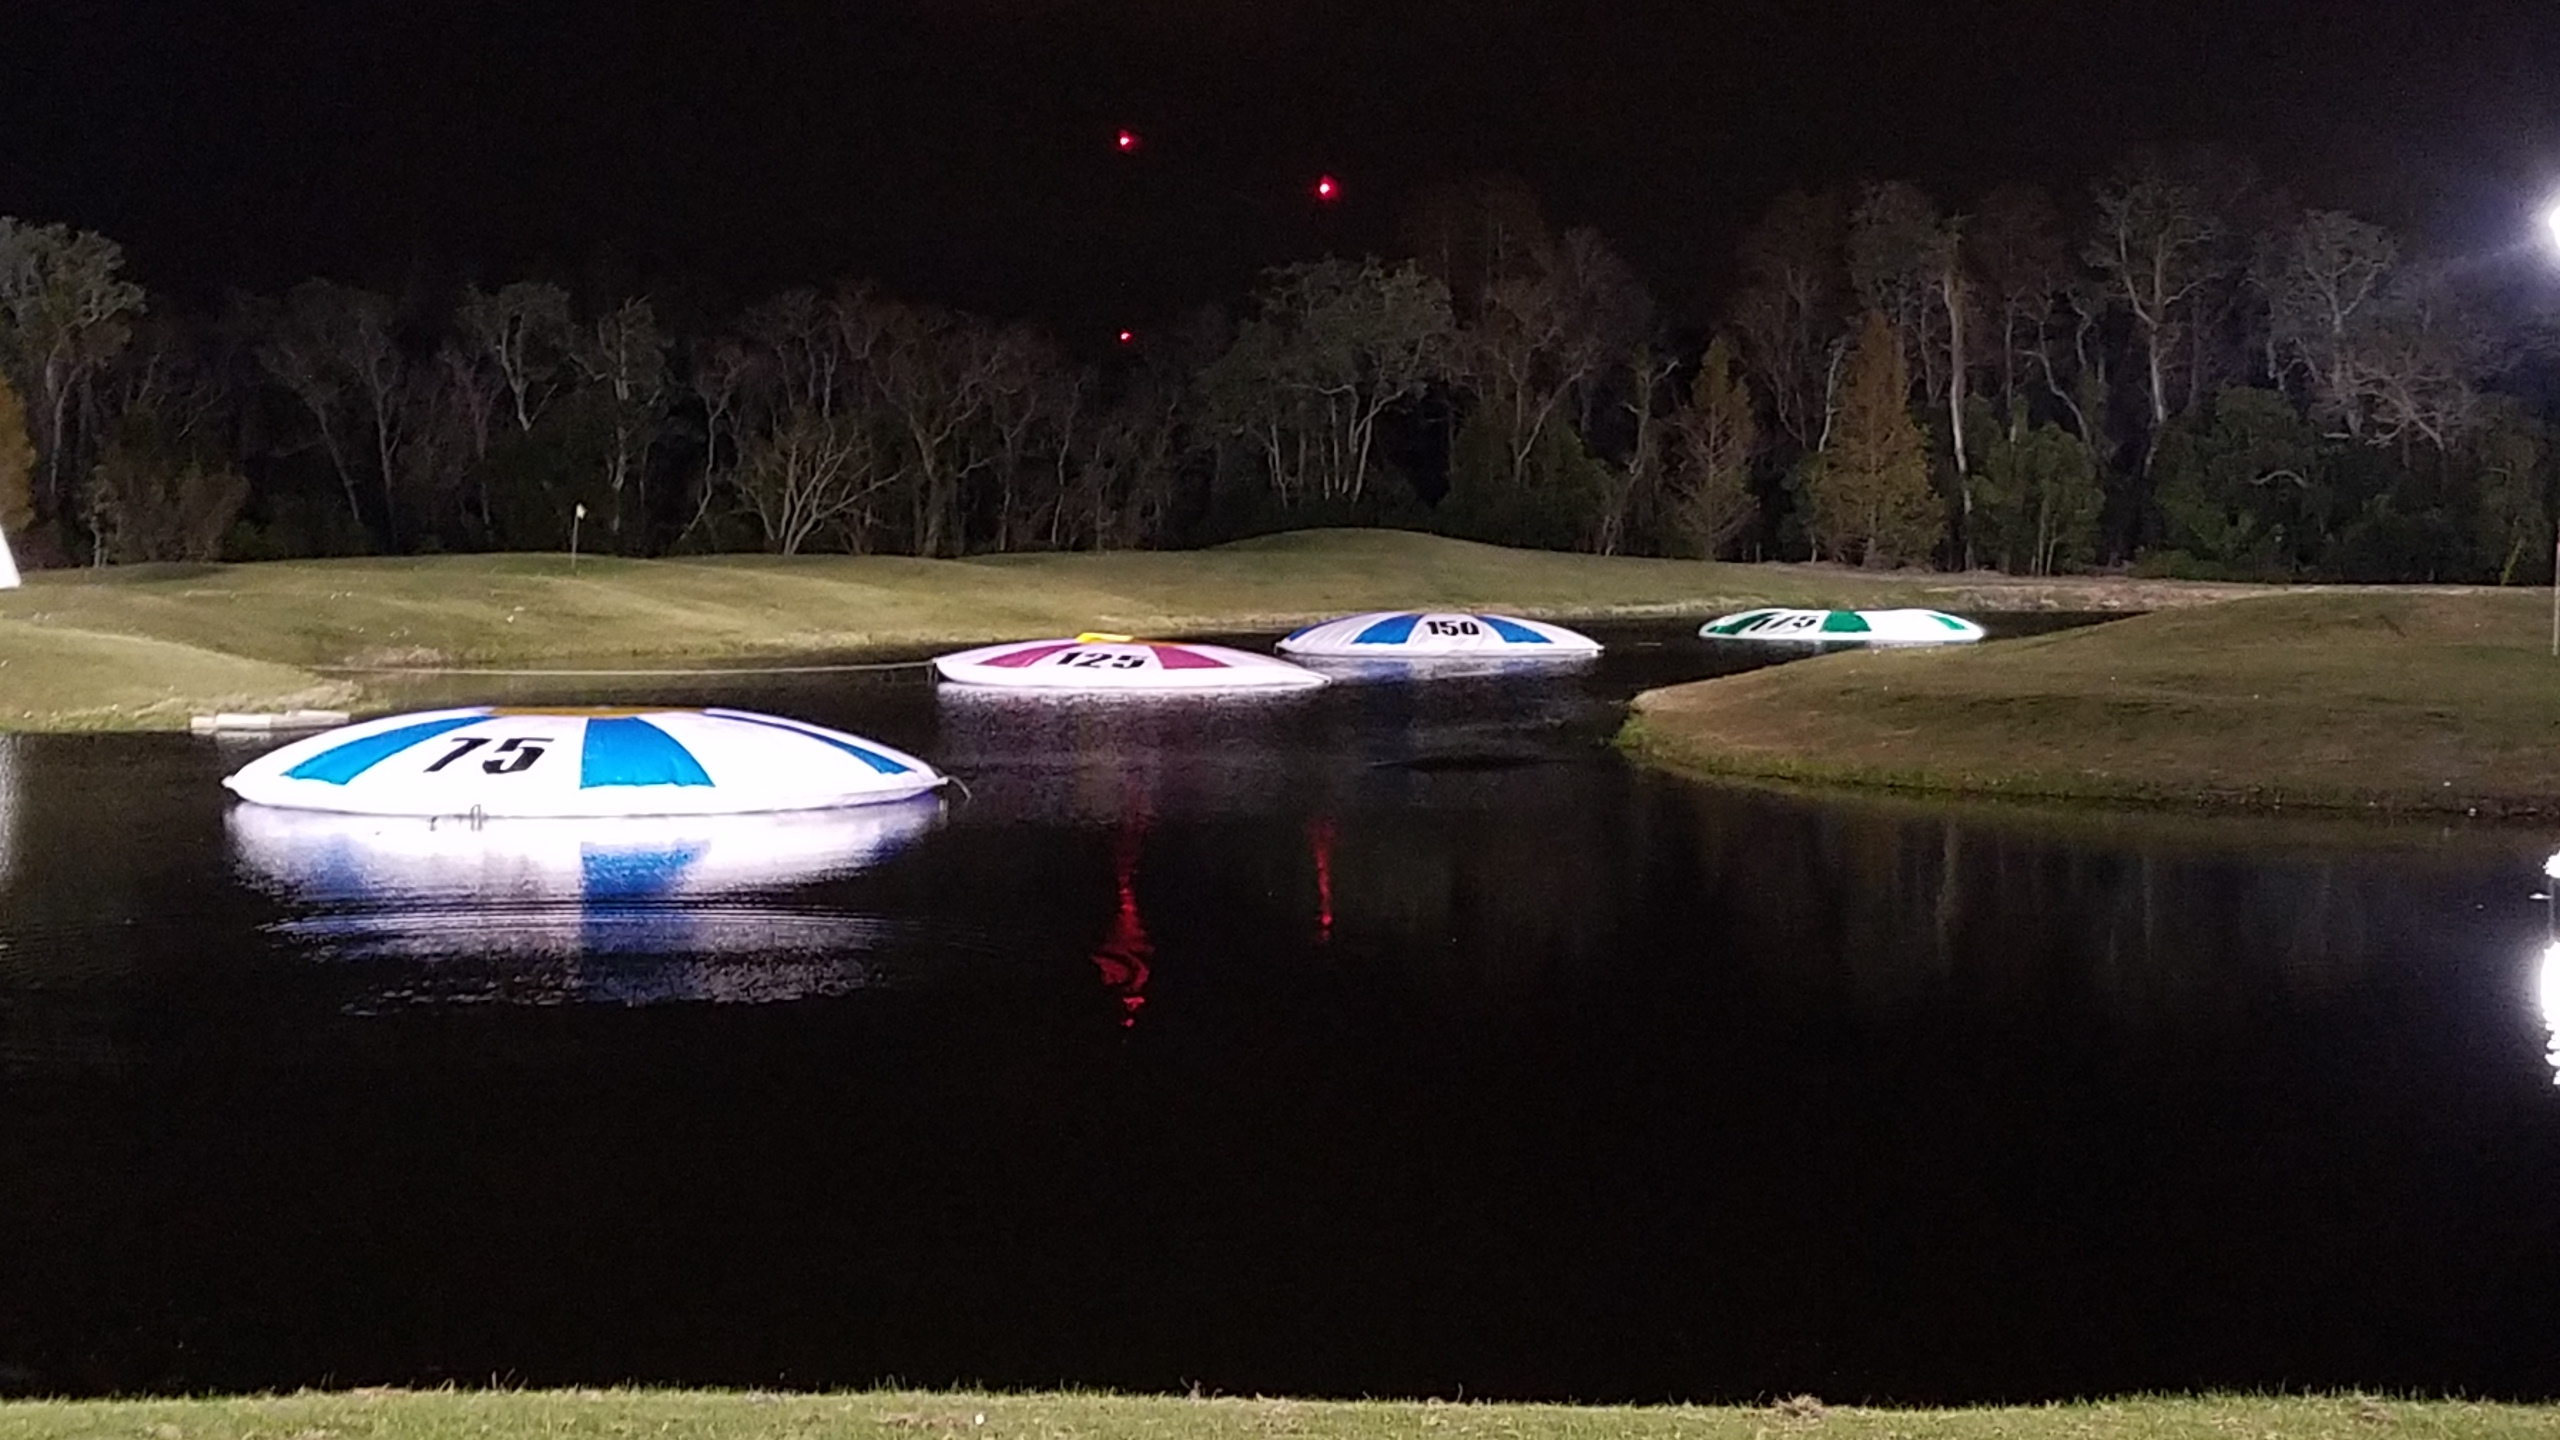 night golf targets for driving ranges